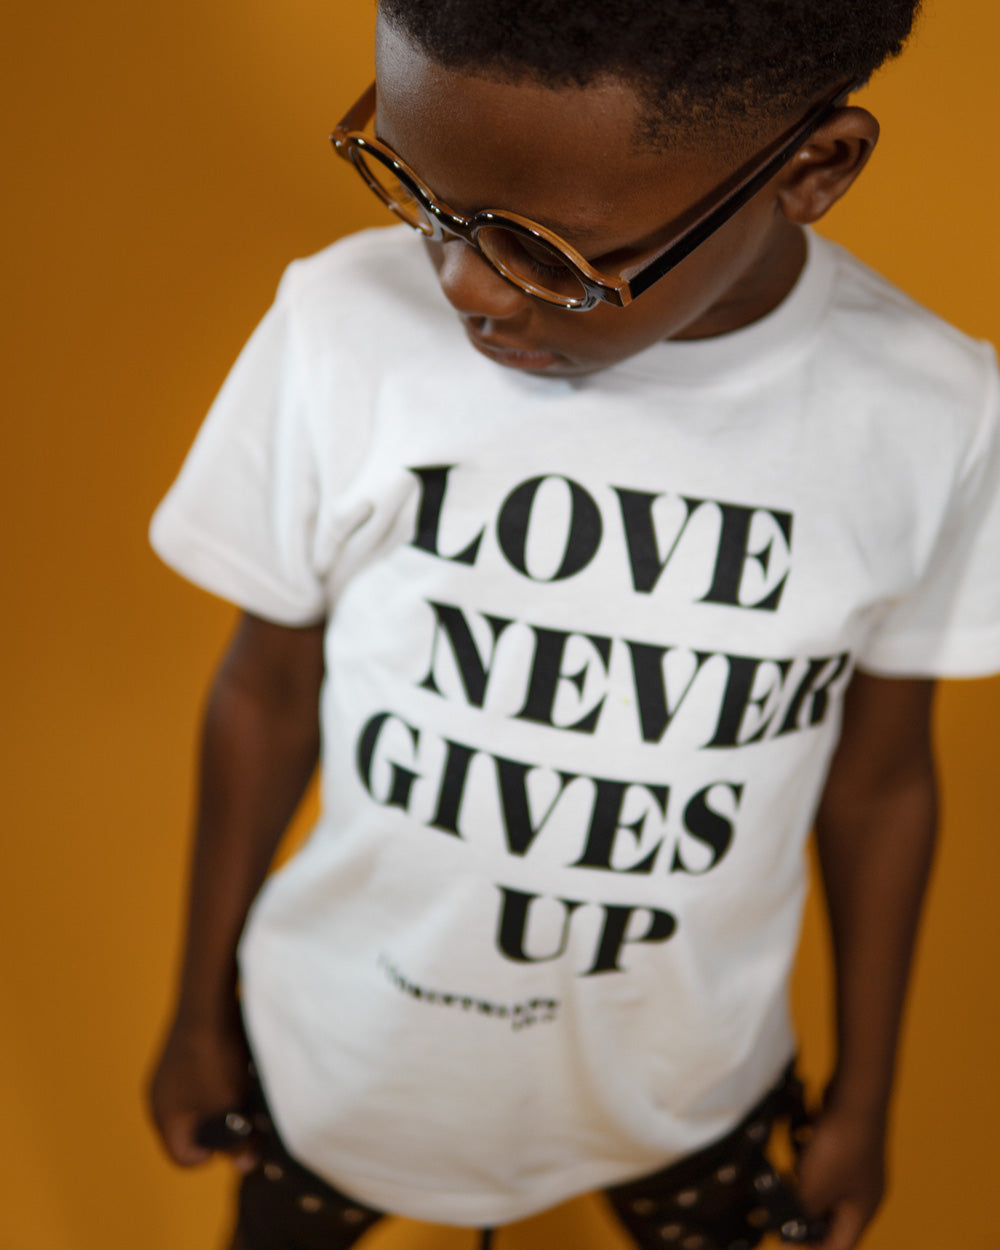 Love Never Gives Up - Kids T-shirt